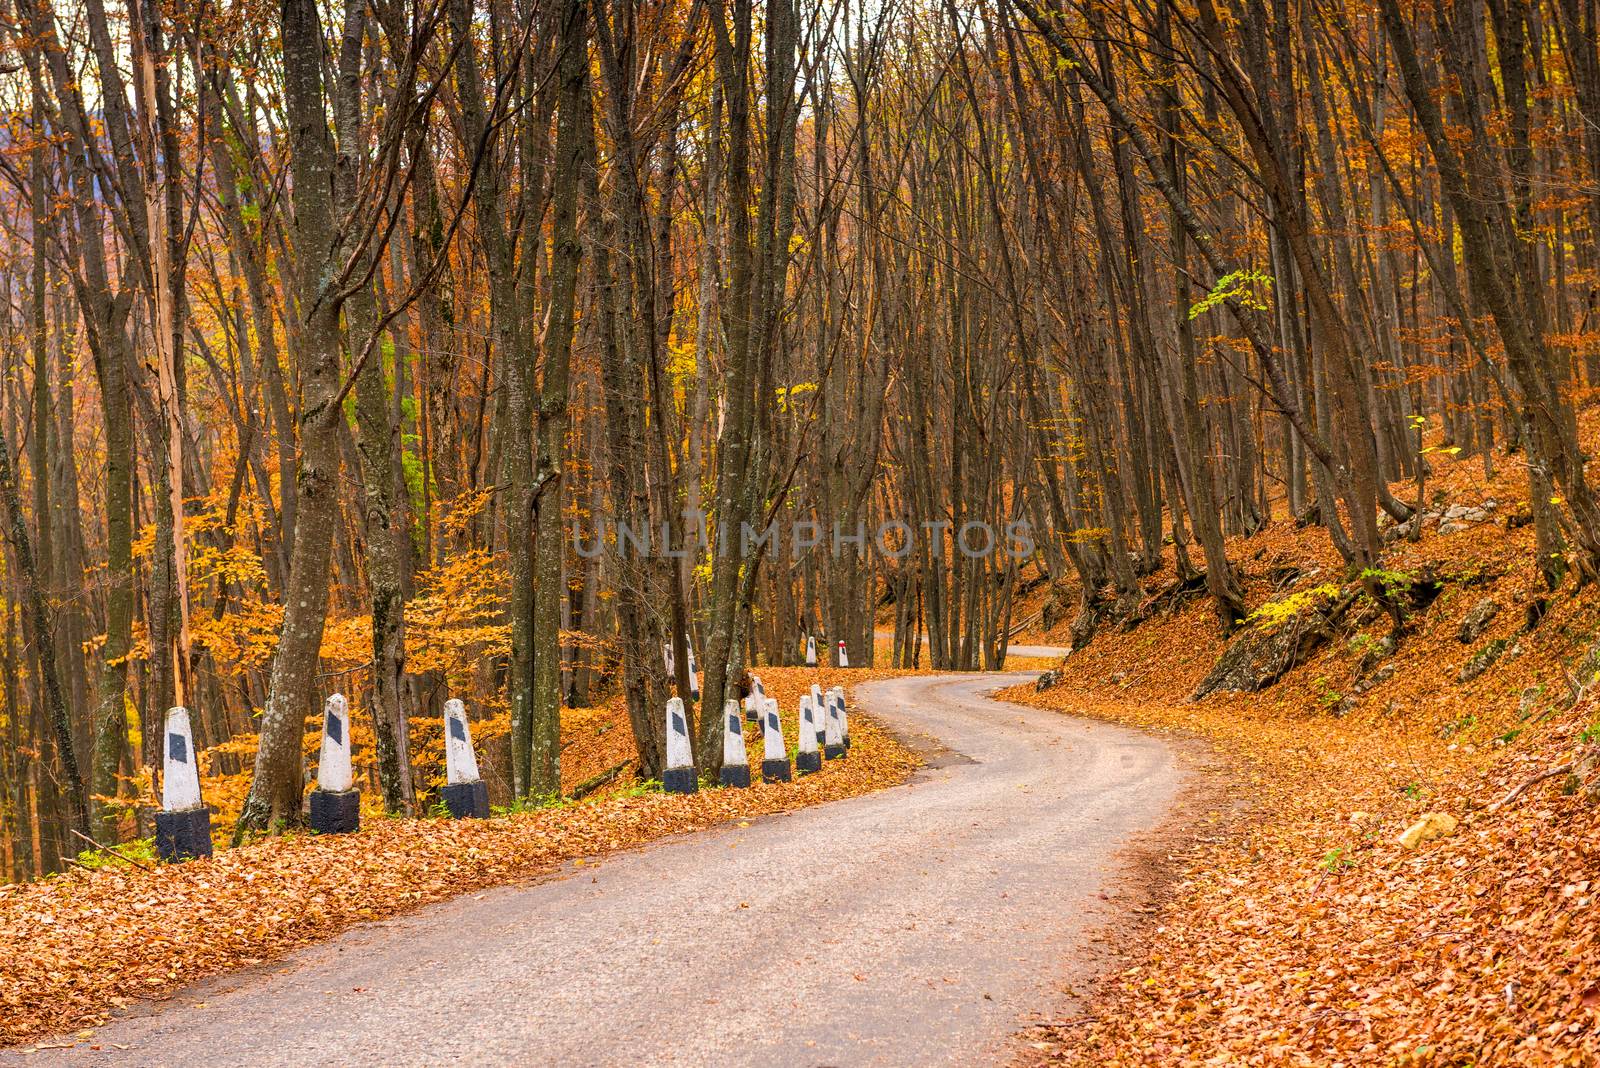 Winding mountain road in the autumn afternoon surrounded by fore by kosmsos111